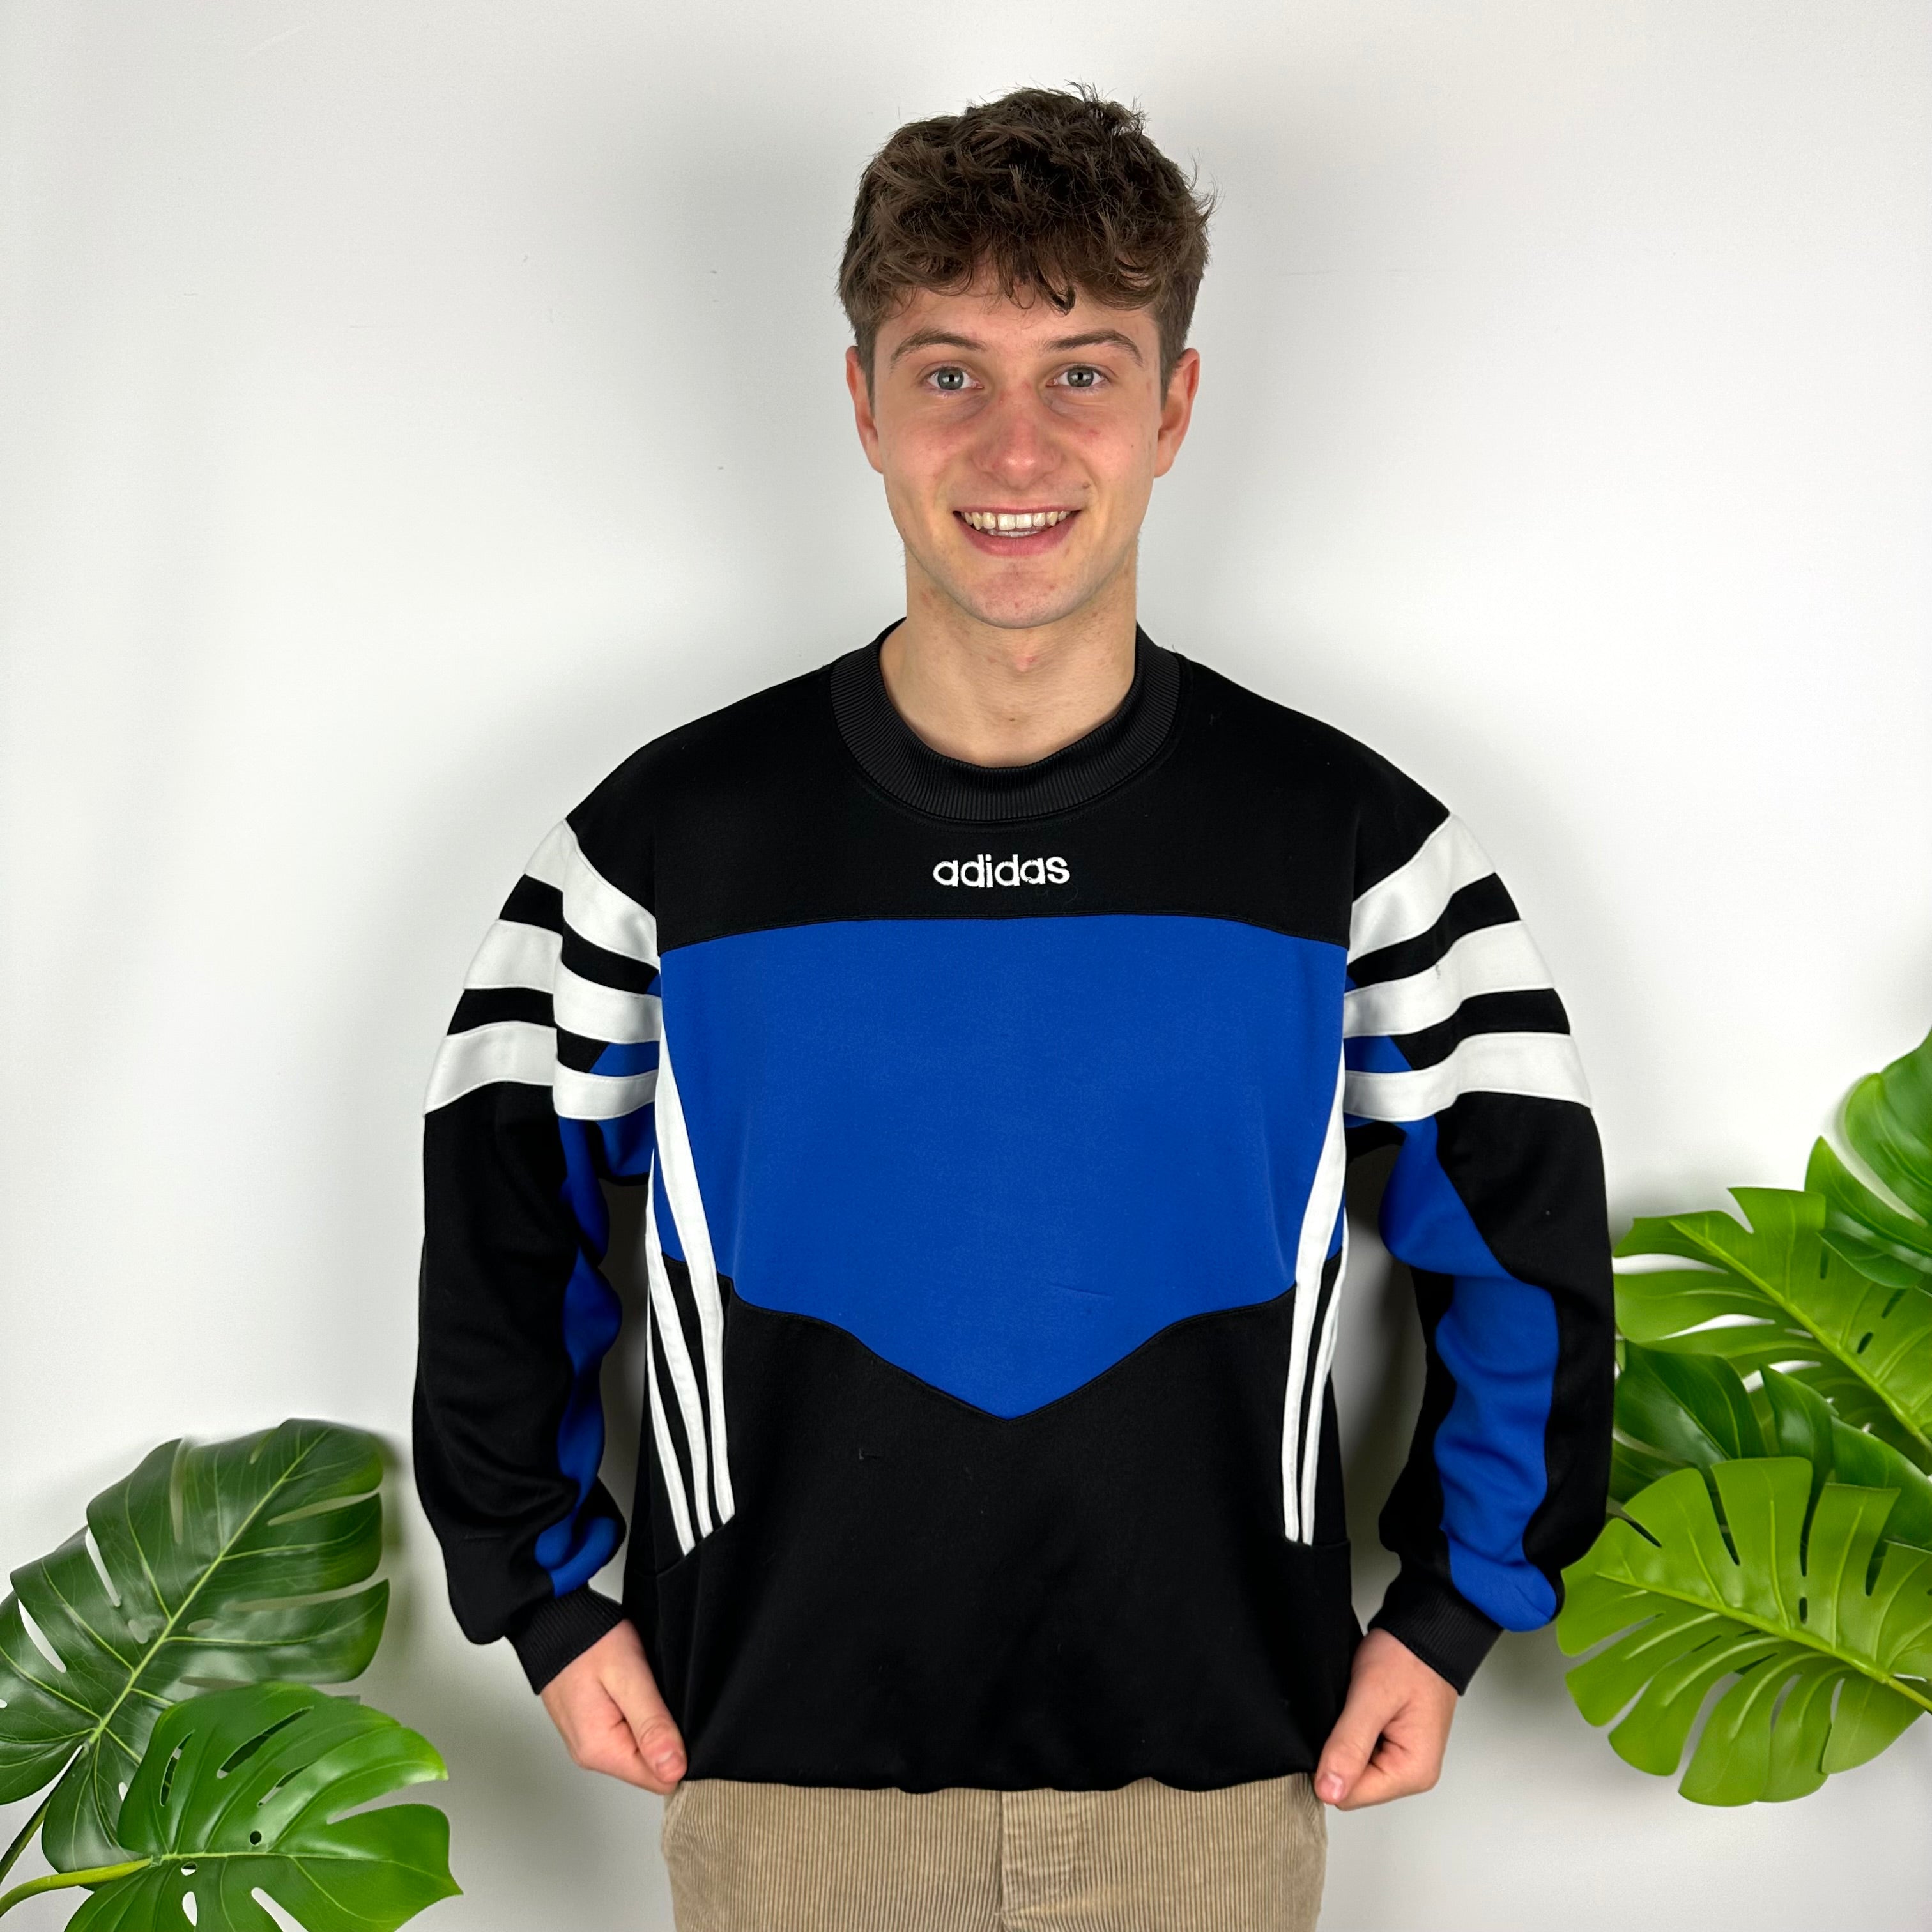 Adidas Black & Blue Embroidered Spell Out Colour Block Sweatshirt (L)